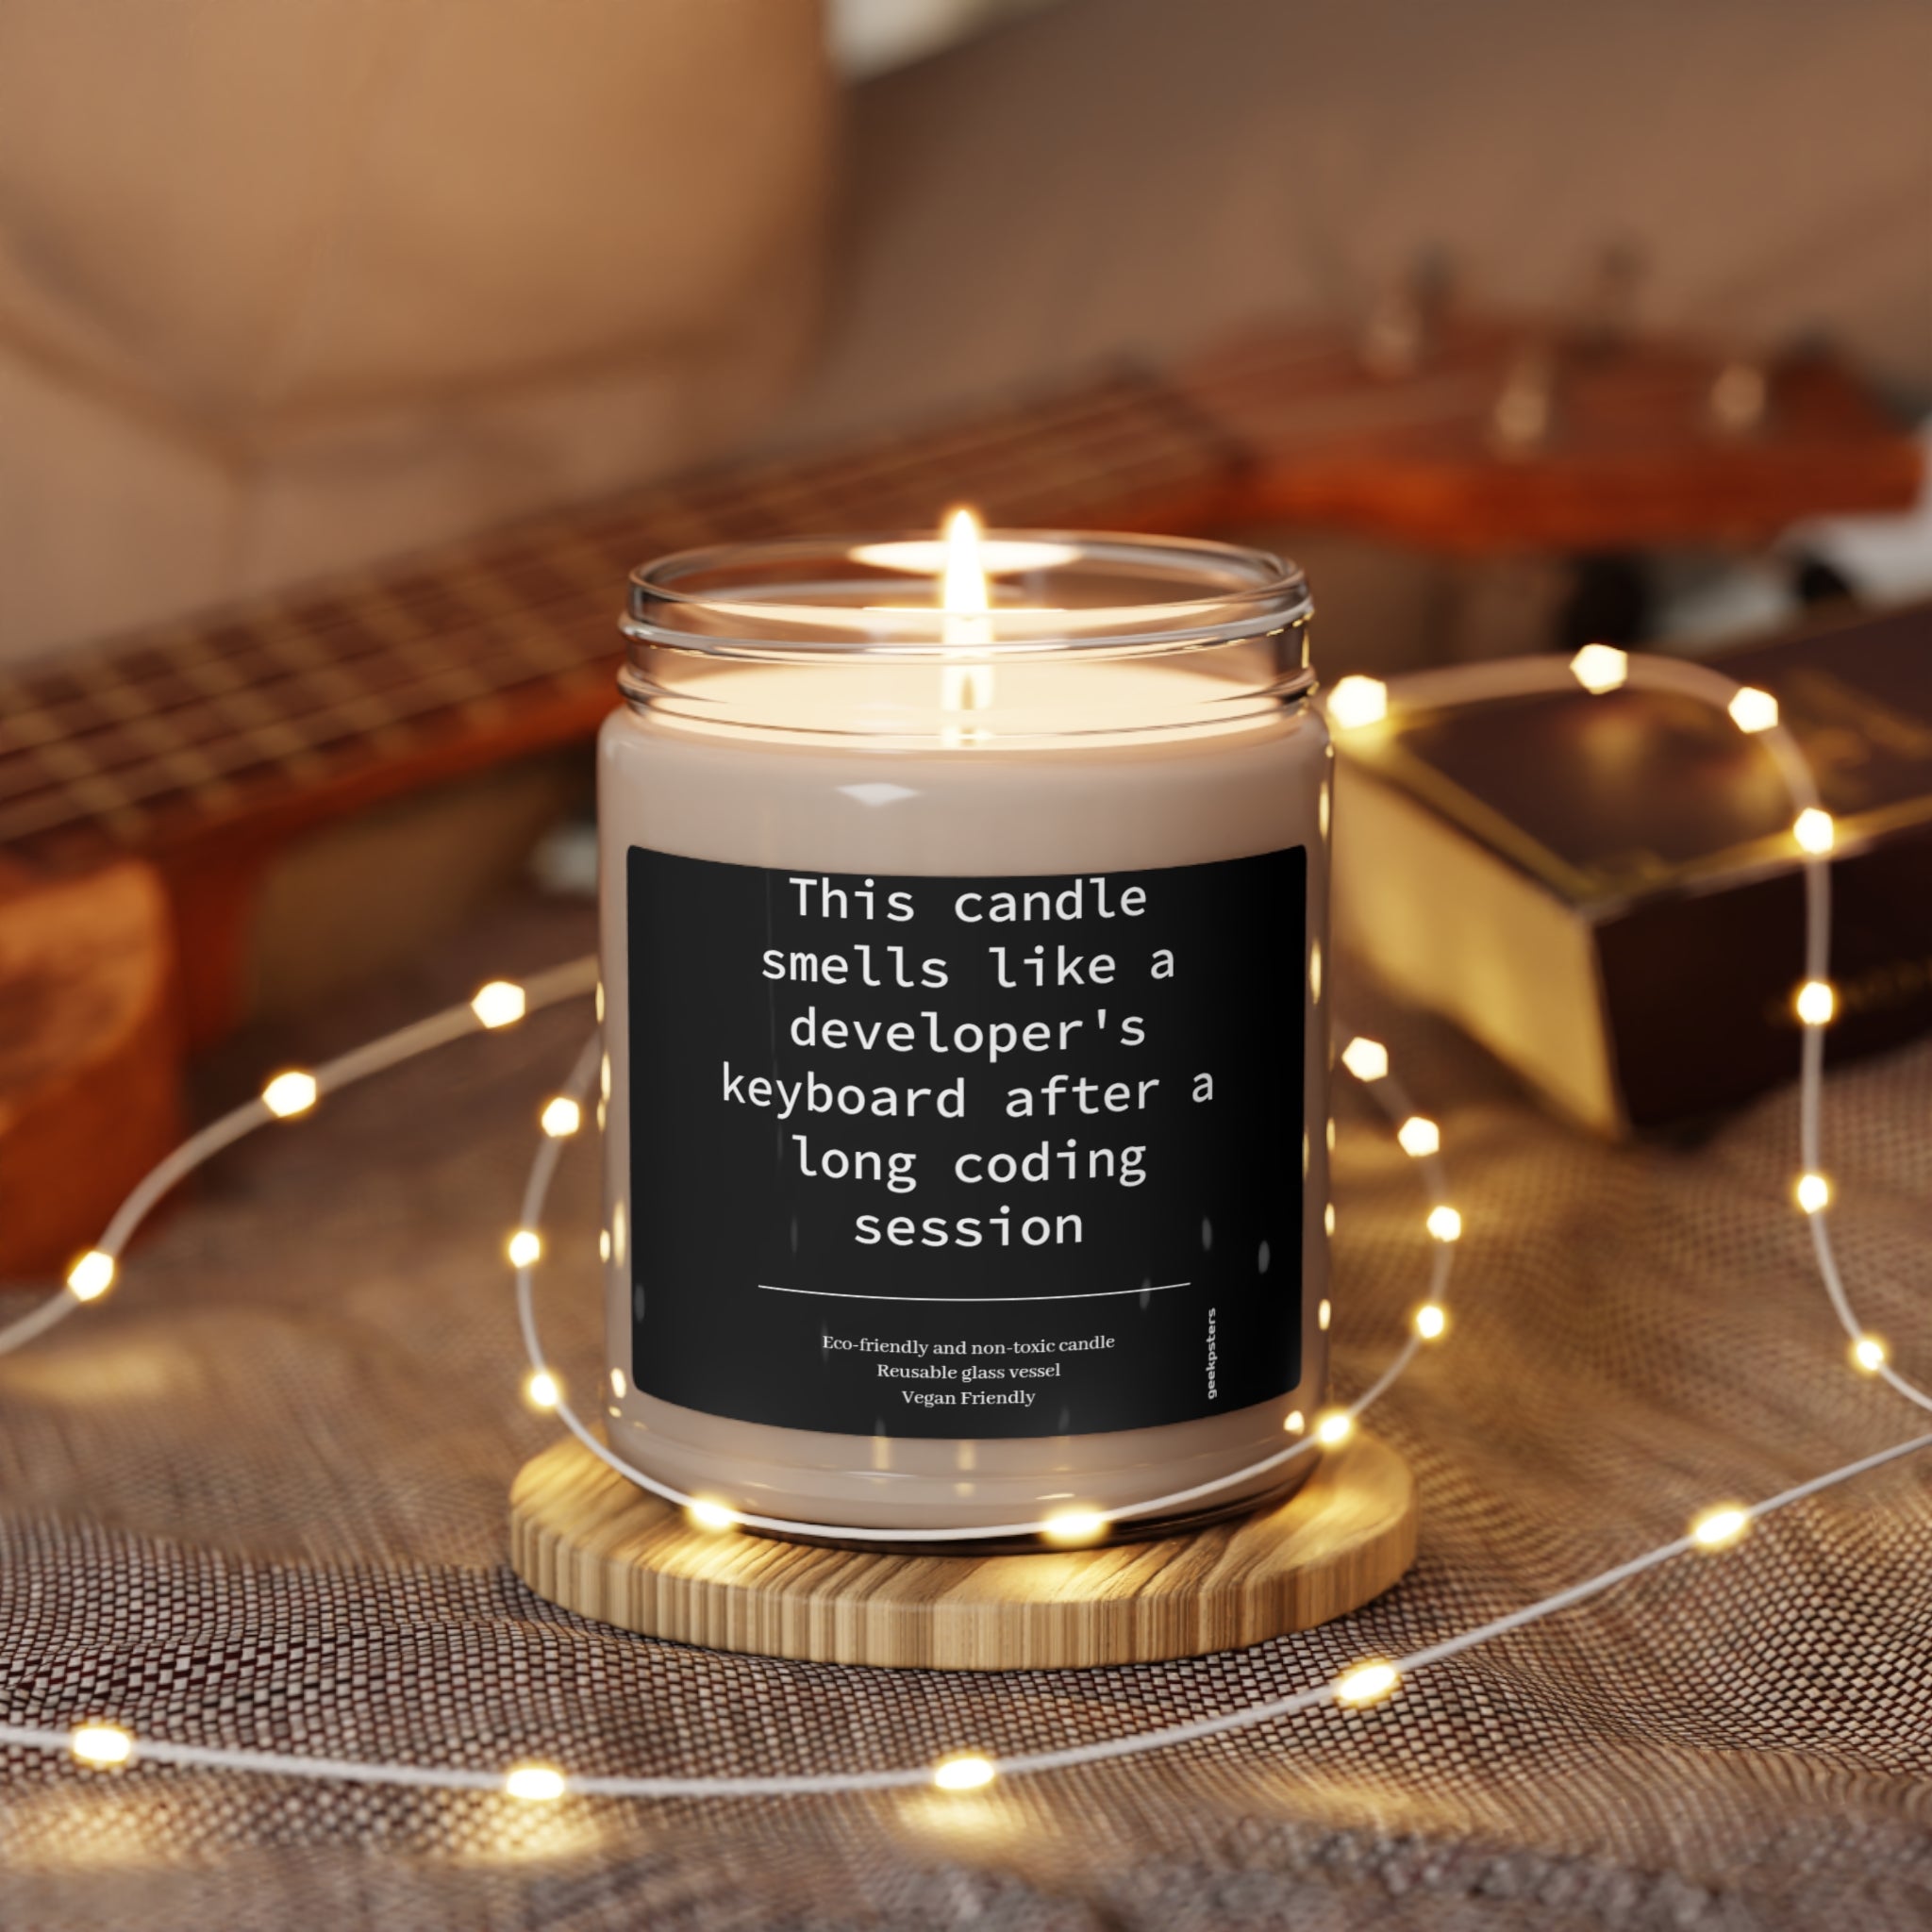 A lit scented candle with a natural soy wax blend and a humorous label suggesting it smells like the scented soy candle, 9oz, placed among fairy lights and gift boxes.